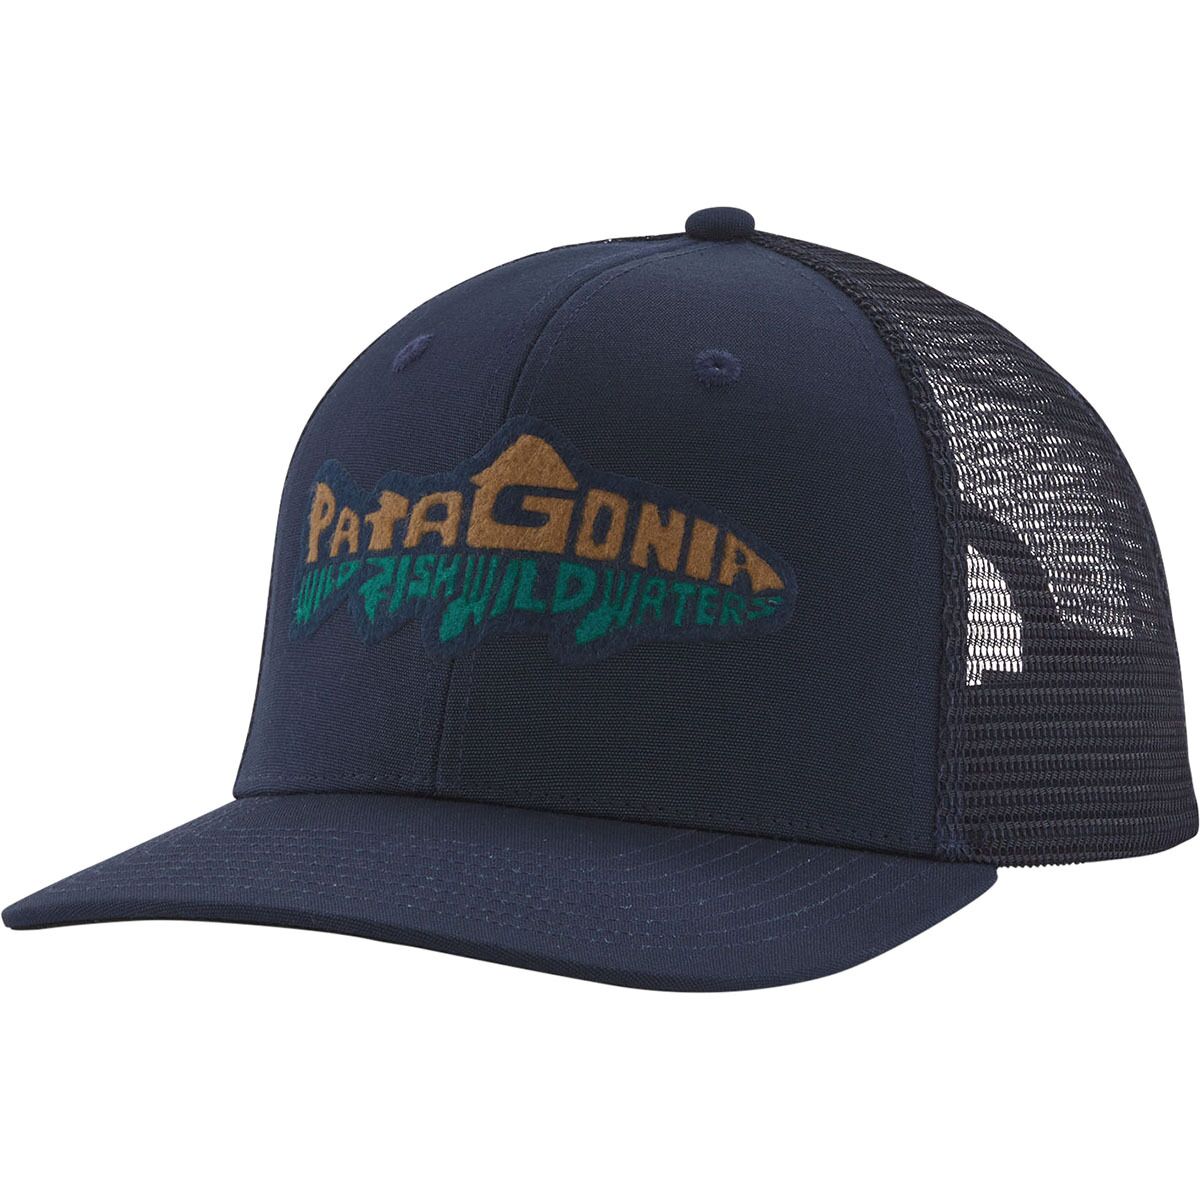 Take A Stand Trucker Hat - Ashland Fly Shop